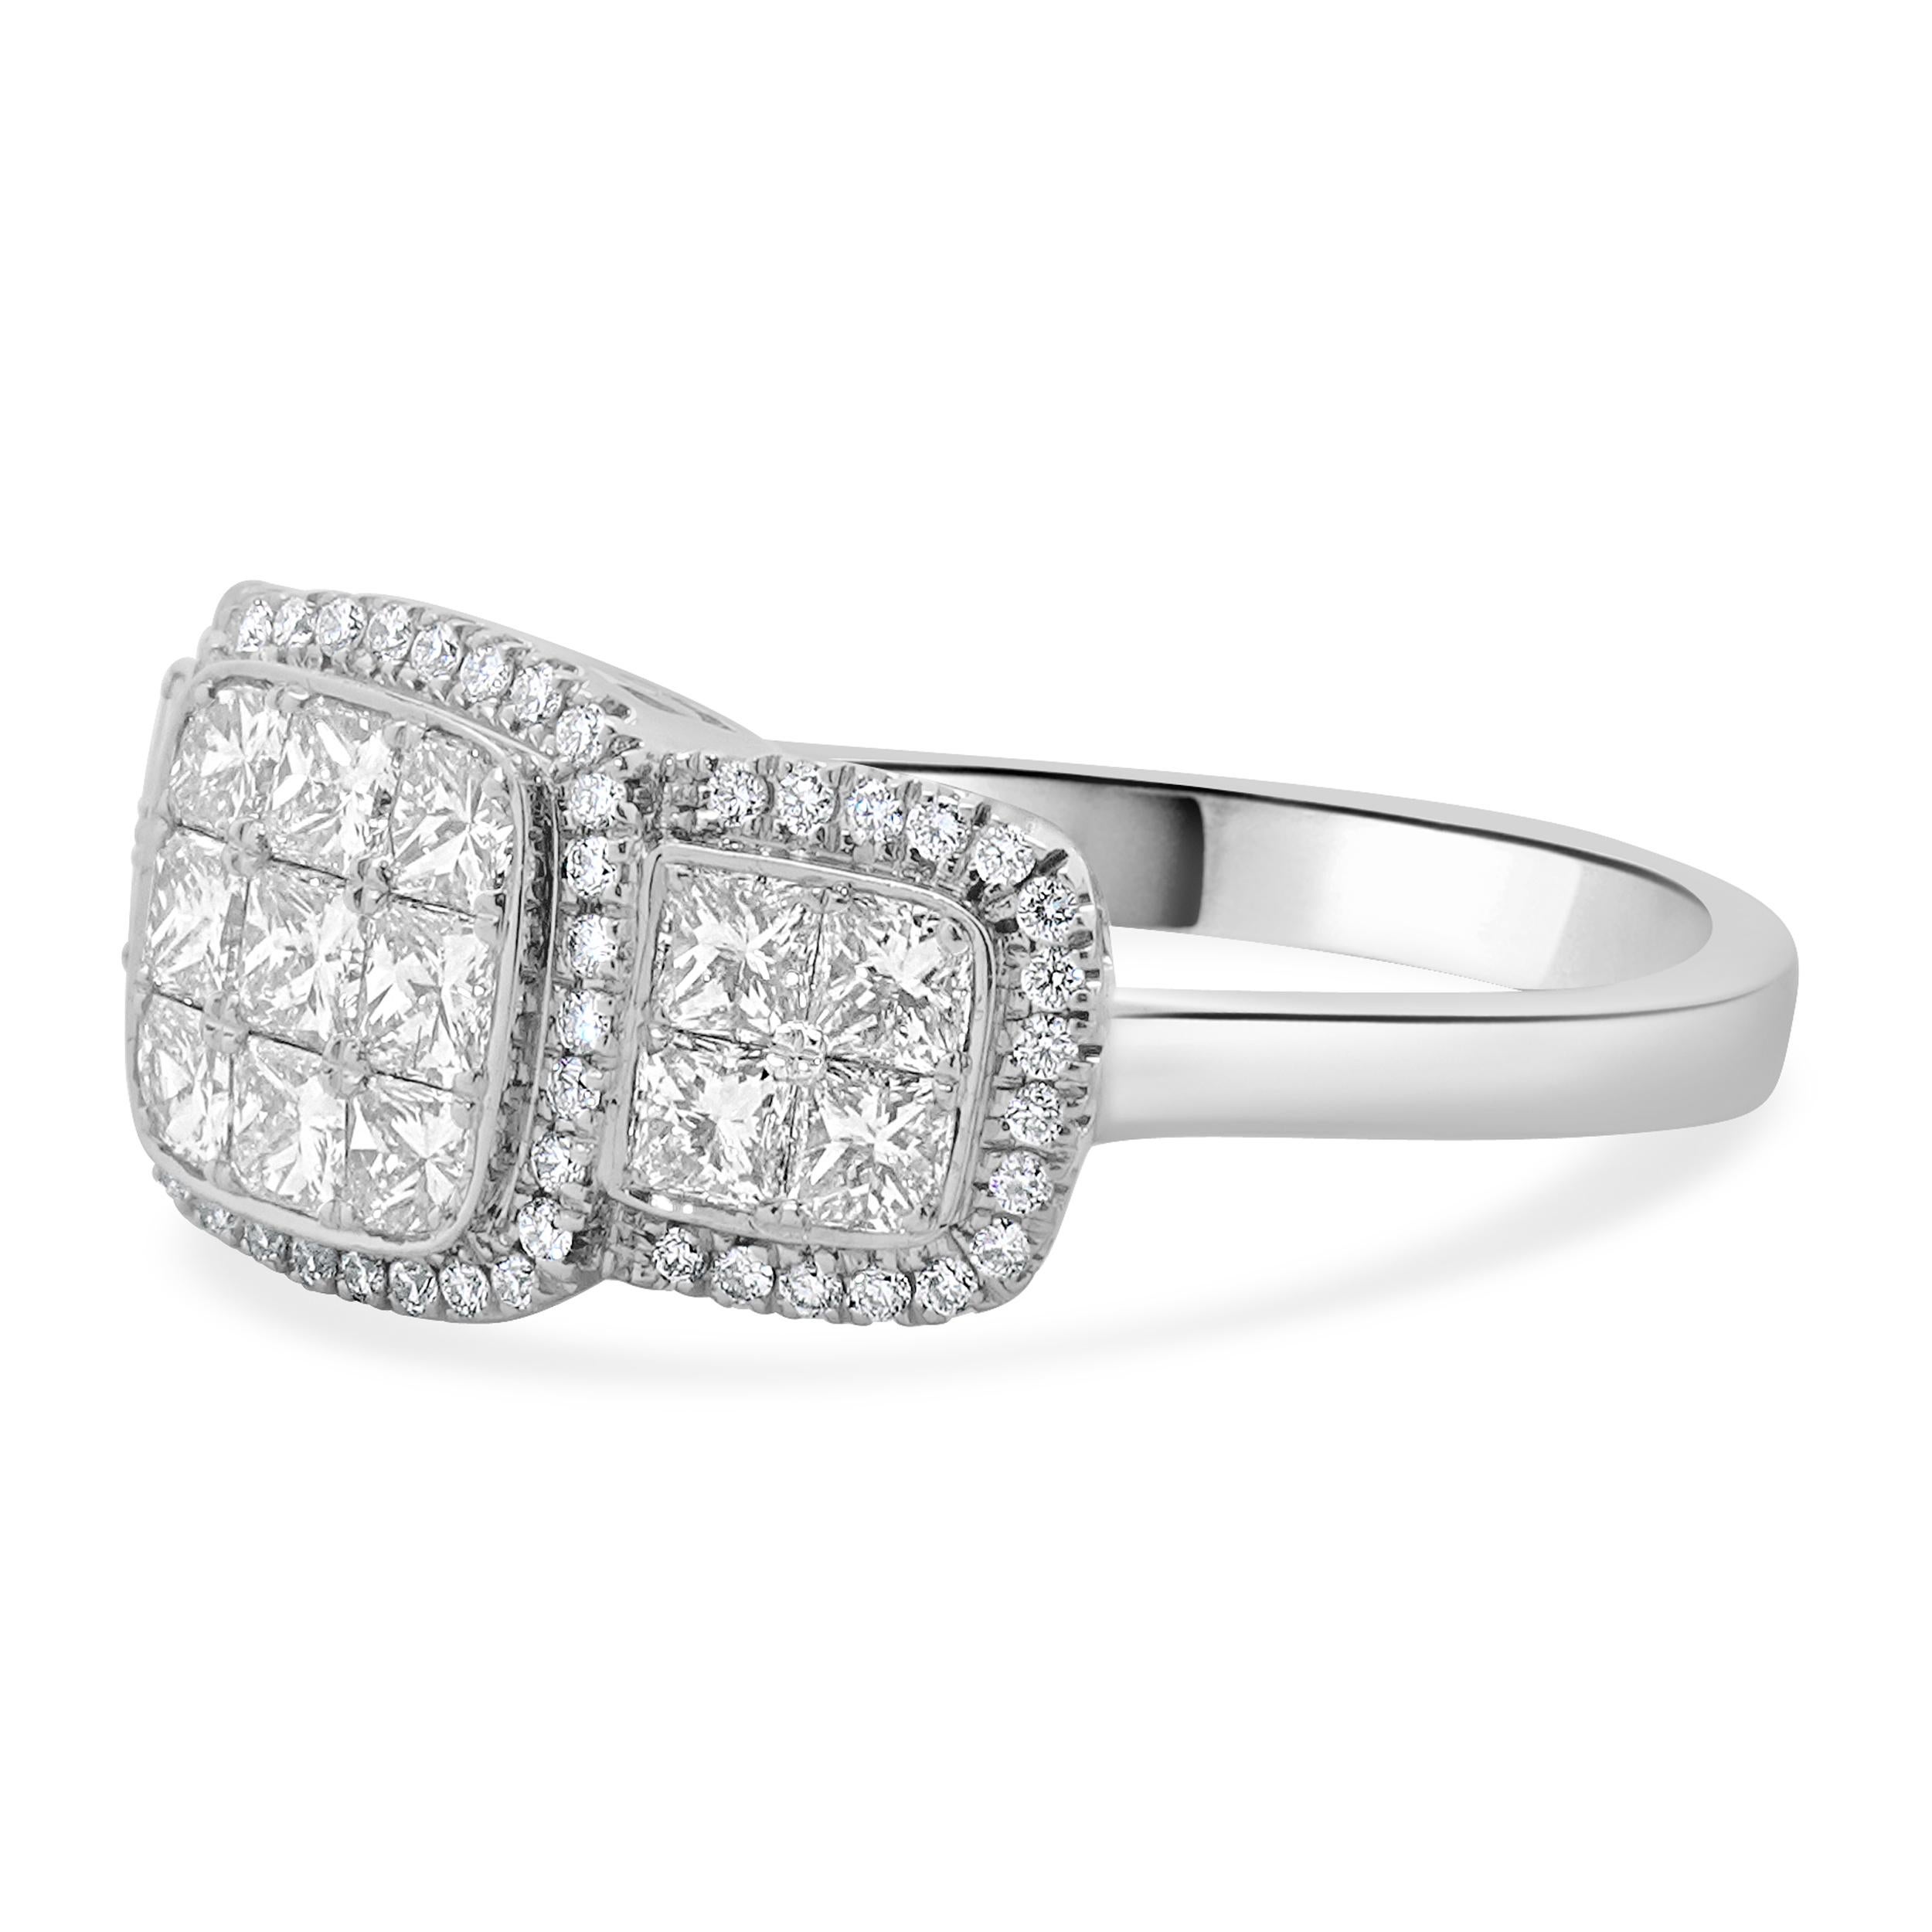 Designer: custom
Material: 18K white gold
Diamond:  17 princess cut =1.38cttw
Color: H 
Clarity: SI1
Diamond:  30 round brilliant cut = 0.21cttw
Color: H
Clarity: SI2
Dimensions: ring top measures 9.5mm wide
Ring Size: 7.75 (complimentary sizing